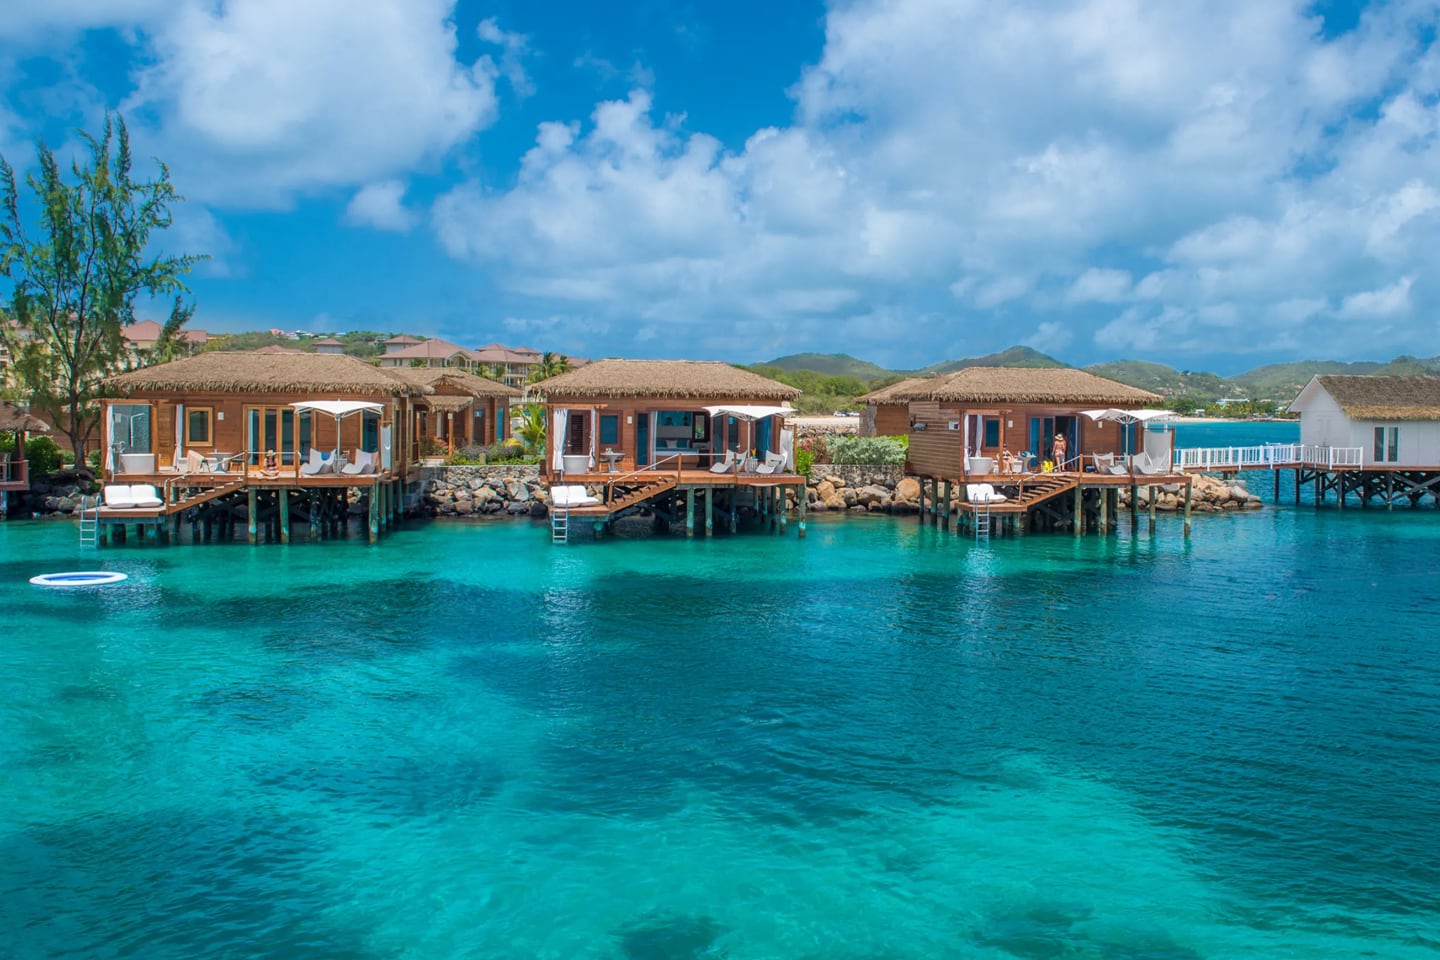 luxury overwater bungalows in the Caribbean in St. Lucia